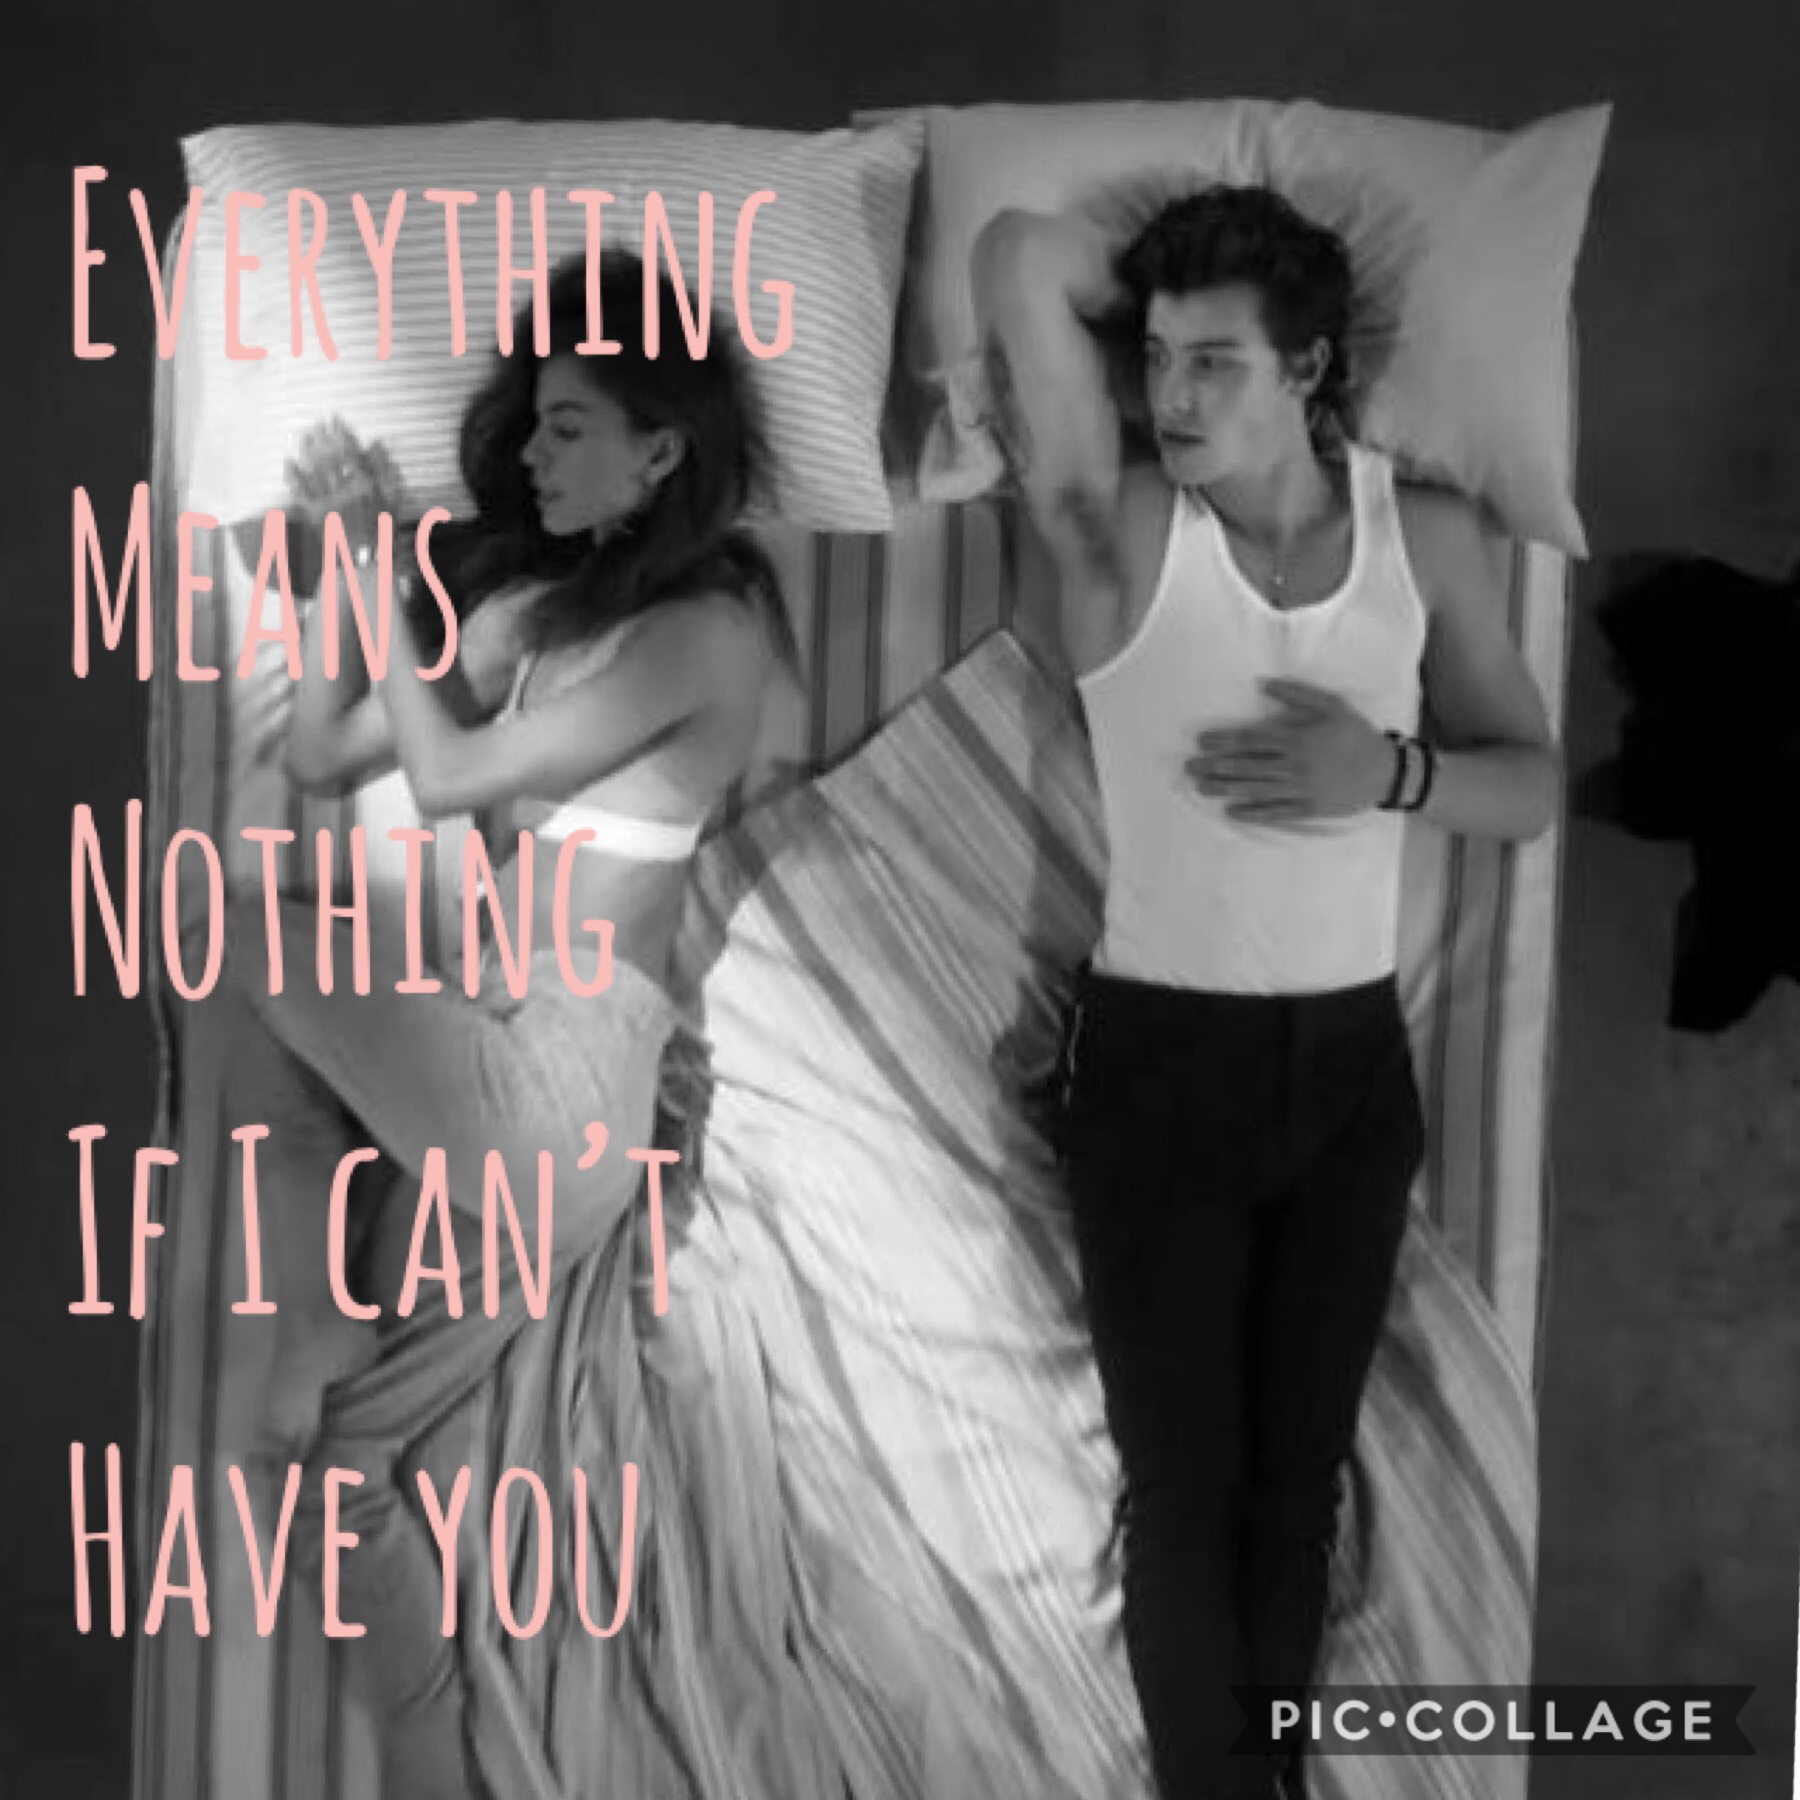 Tap
Shawn Mendes everything means nothing